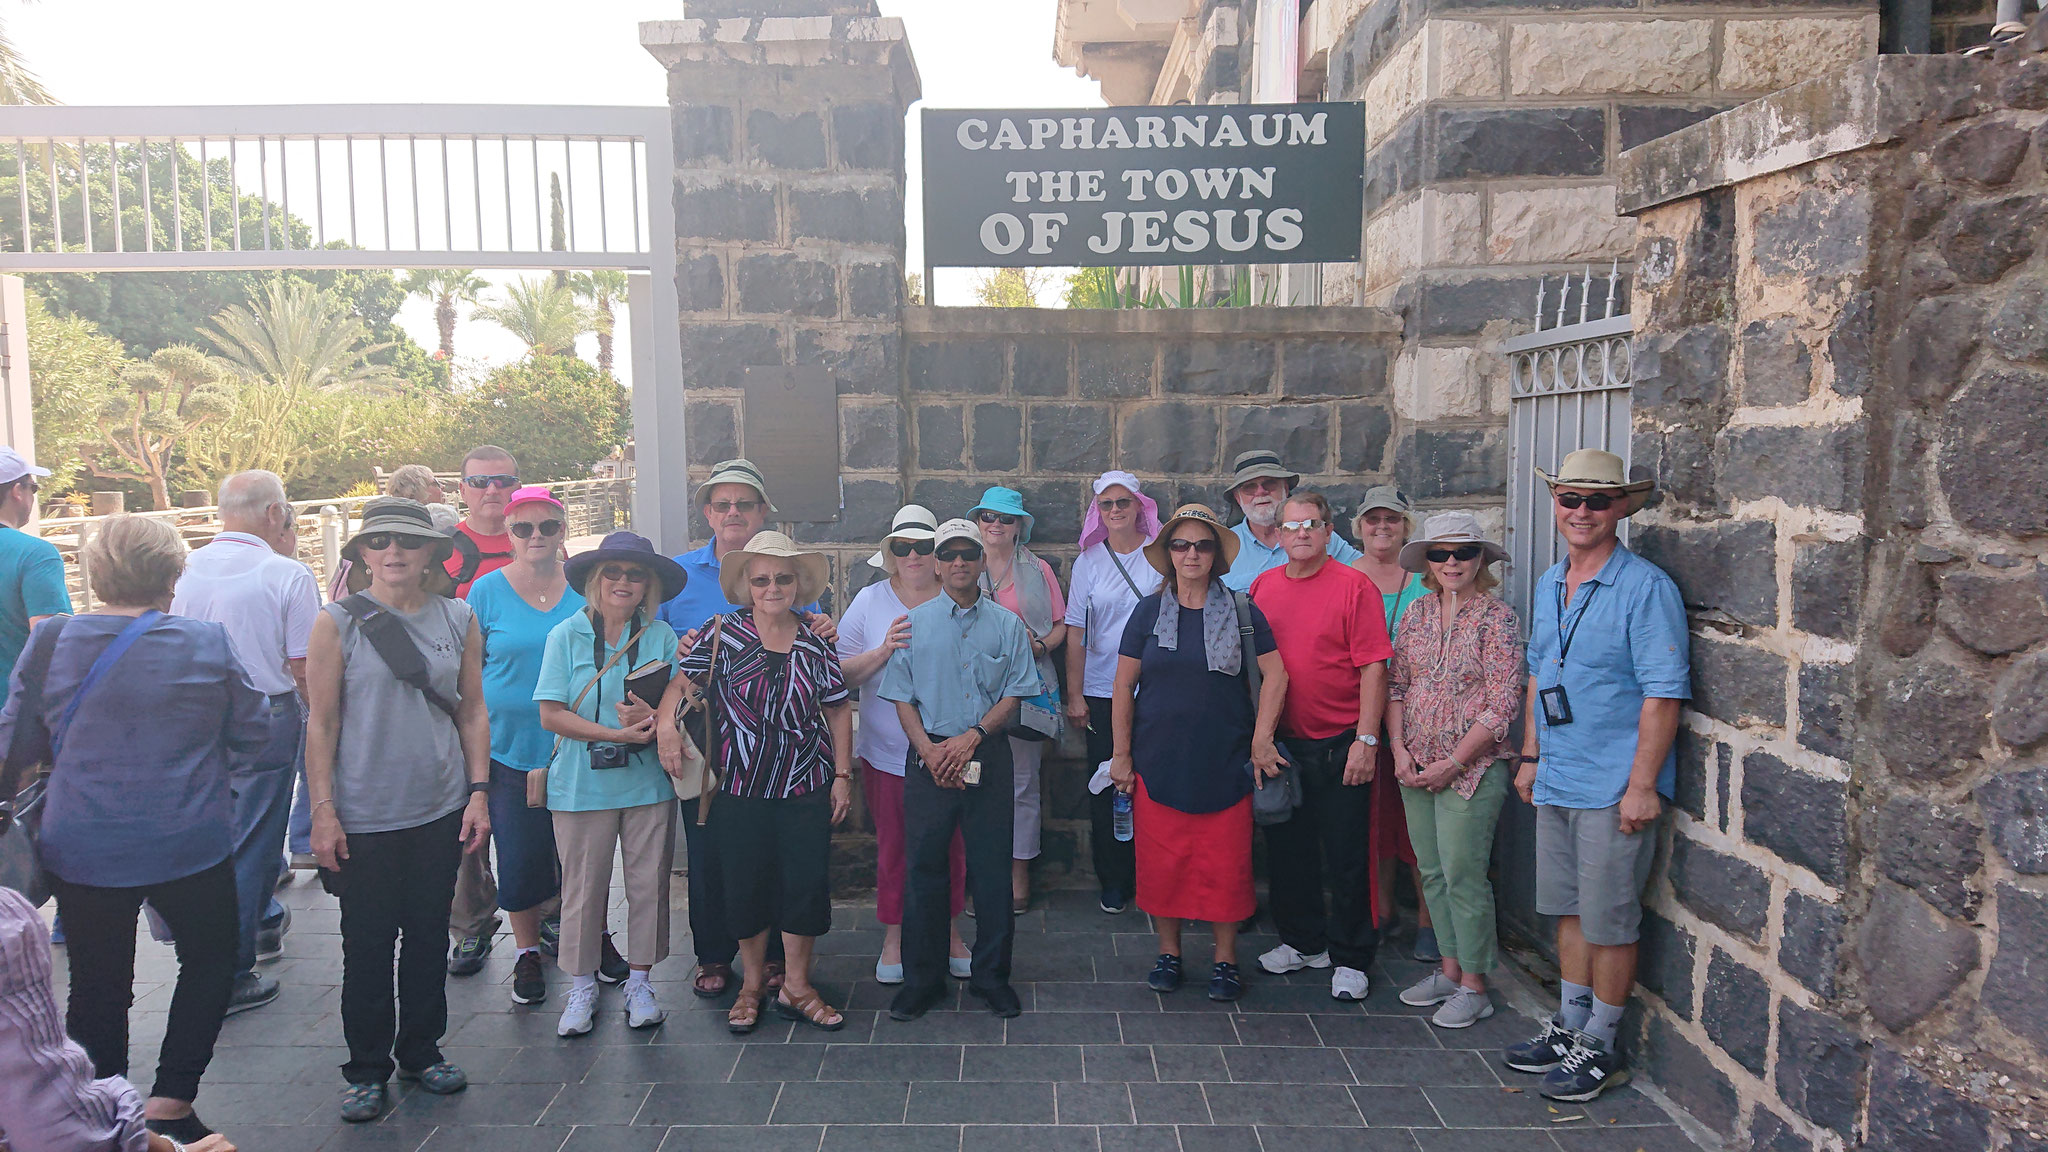 At the entrance to Capernaum, the town where Jesus lived.